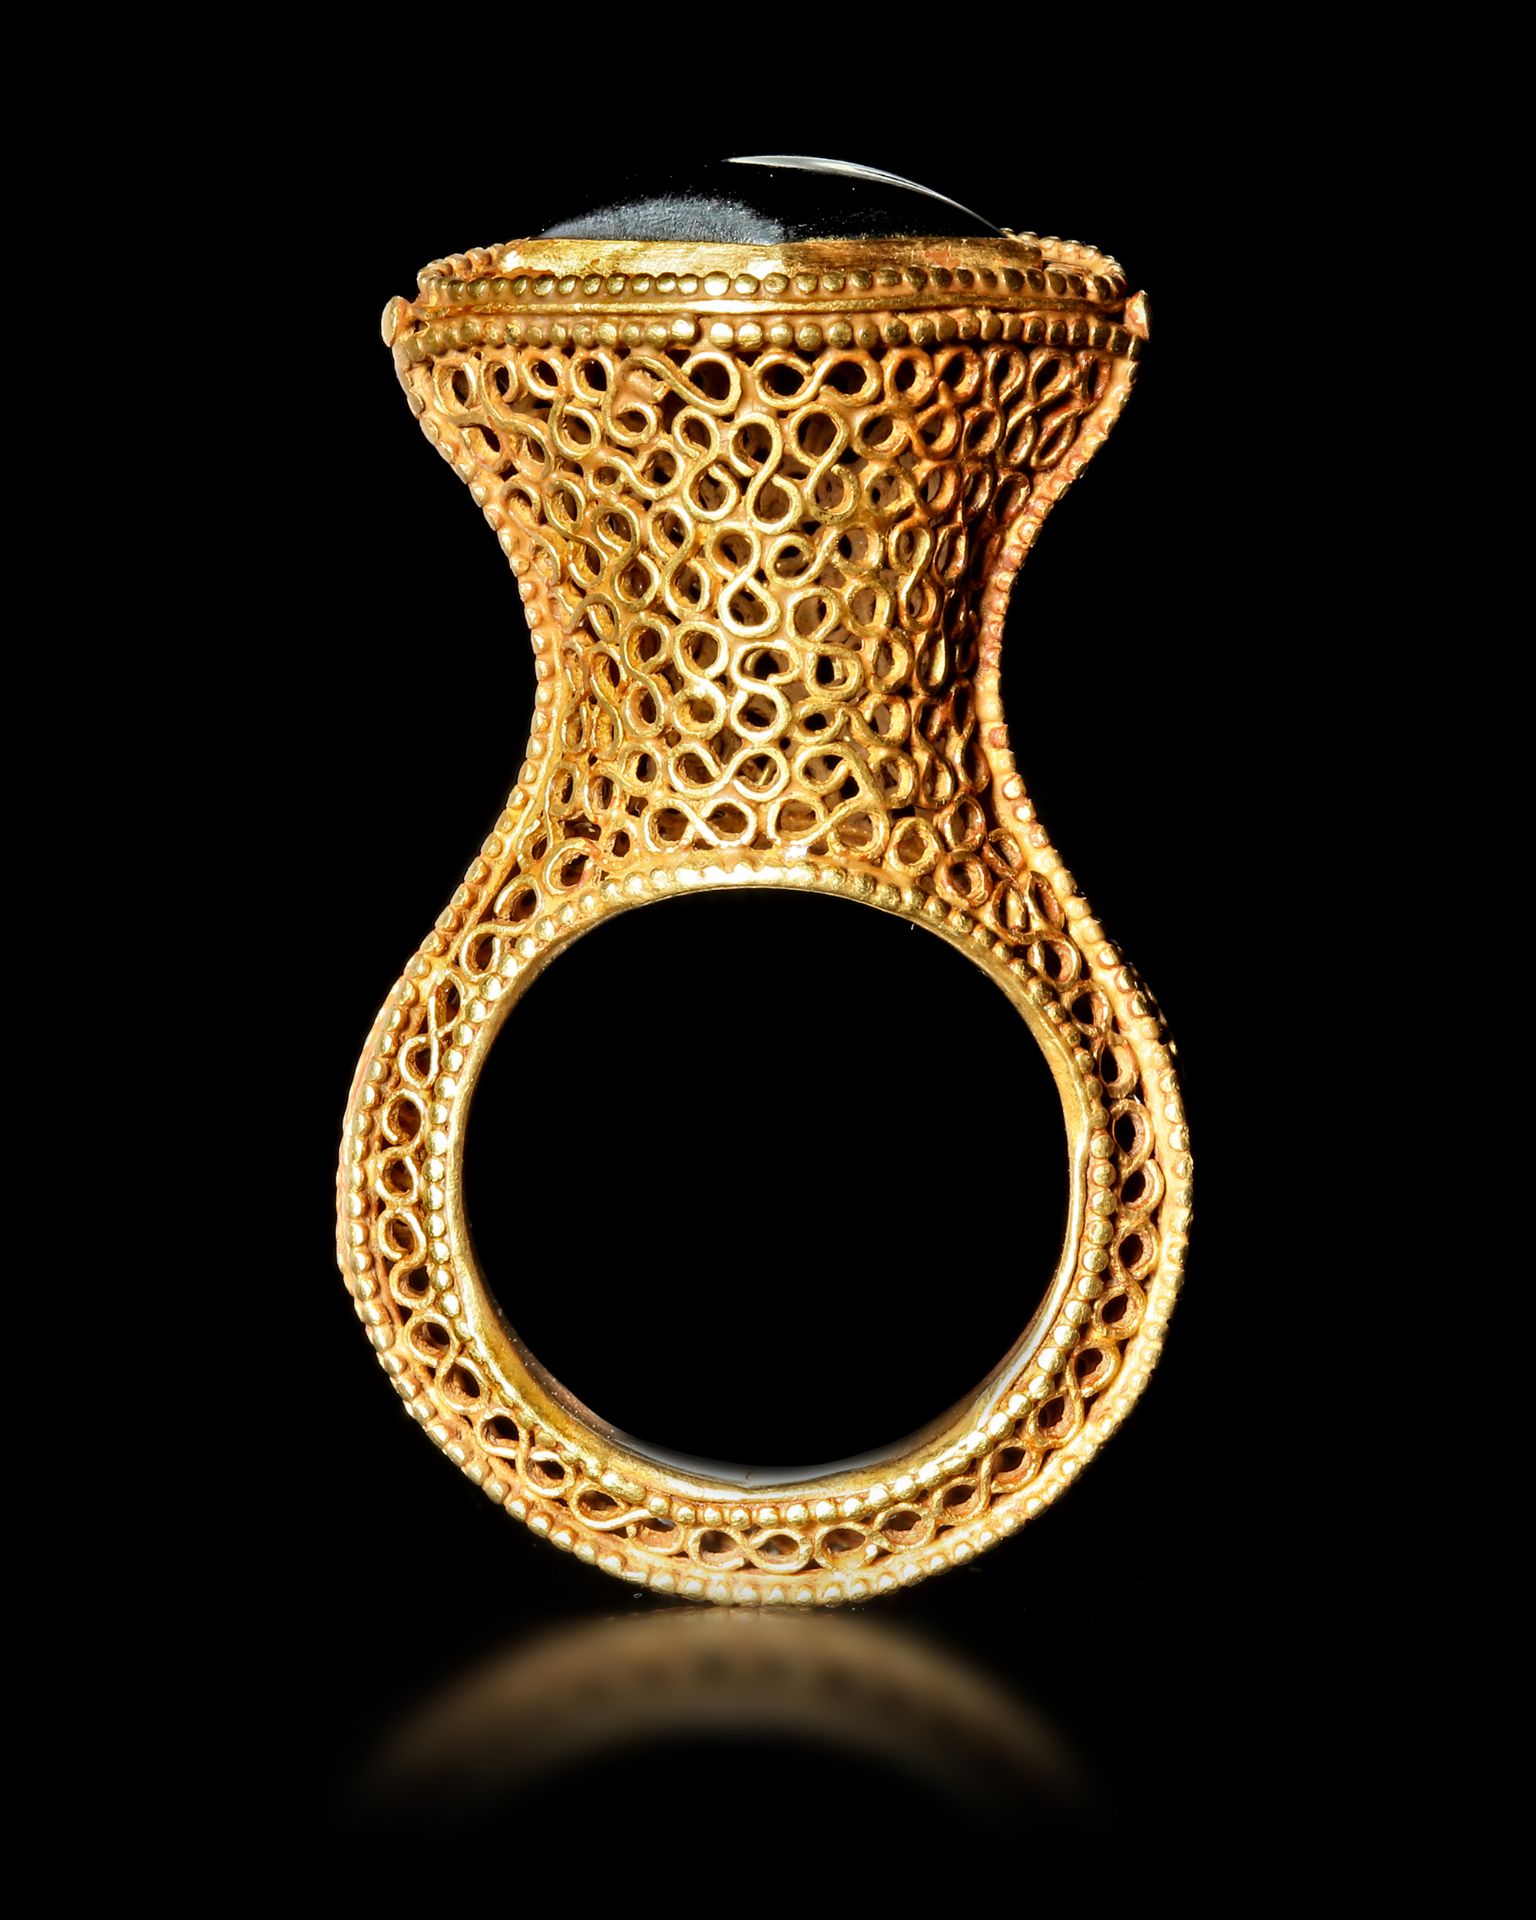 A MAGNIFICENT EARLY ISLAMIC GOLD RING, NEAR EAST 10TH-11TH CENTURY